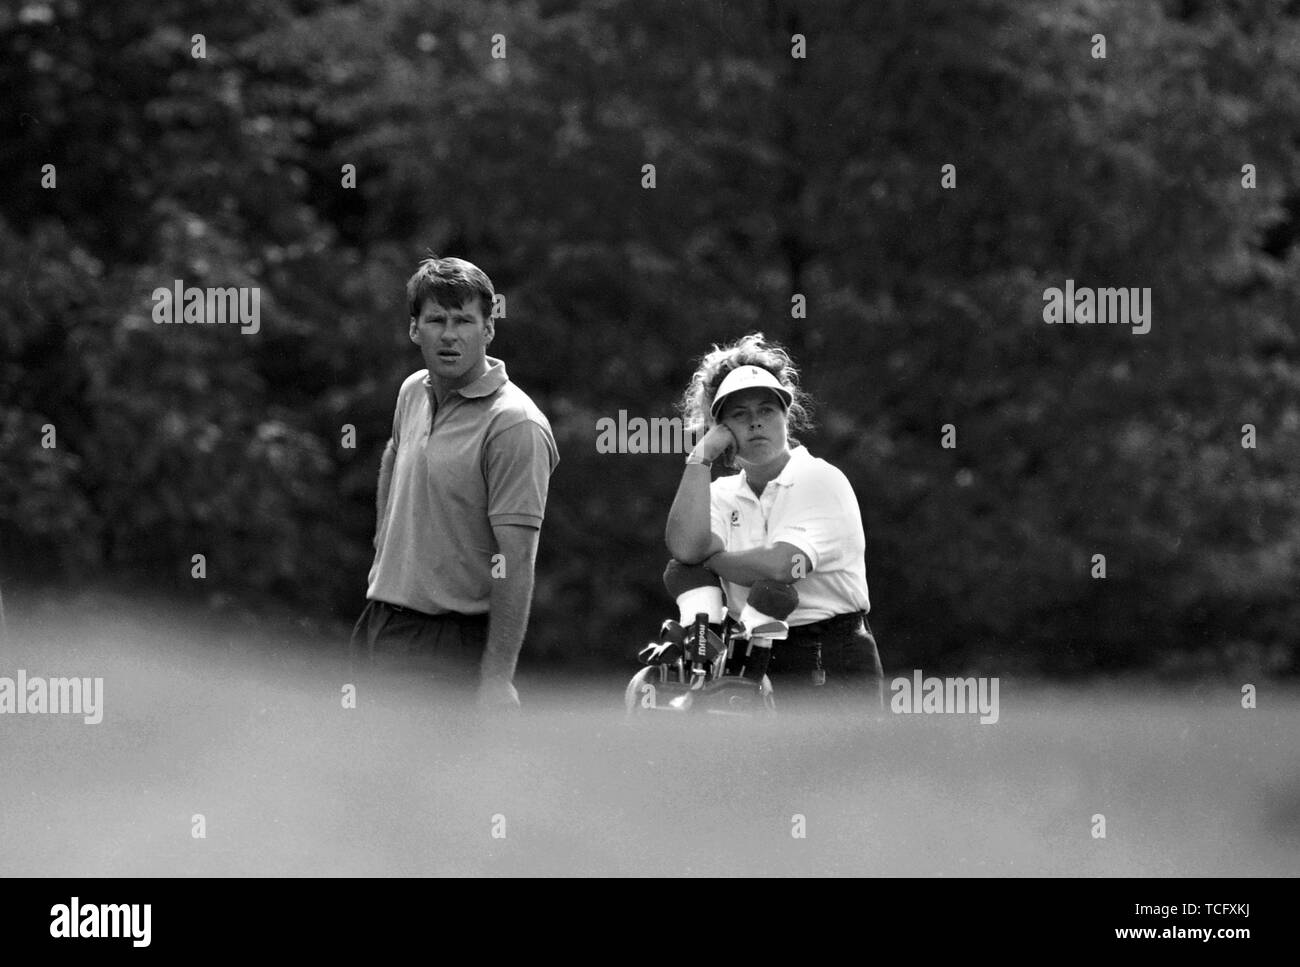 Suntory World Matchplay Golf Championship in 1990 at Wentworth Club.  Nick Faldo with caddy Fanny Sunesson  Photo by Tony Henshaw Stock Photo